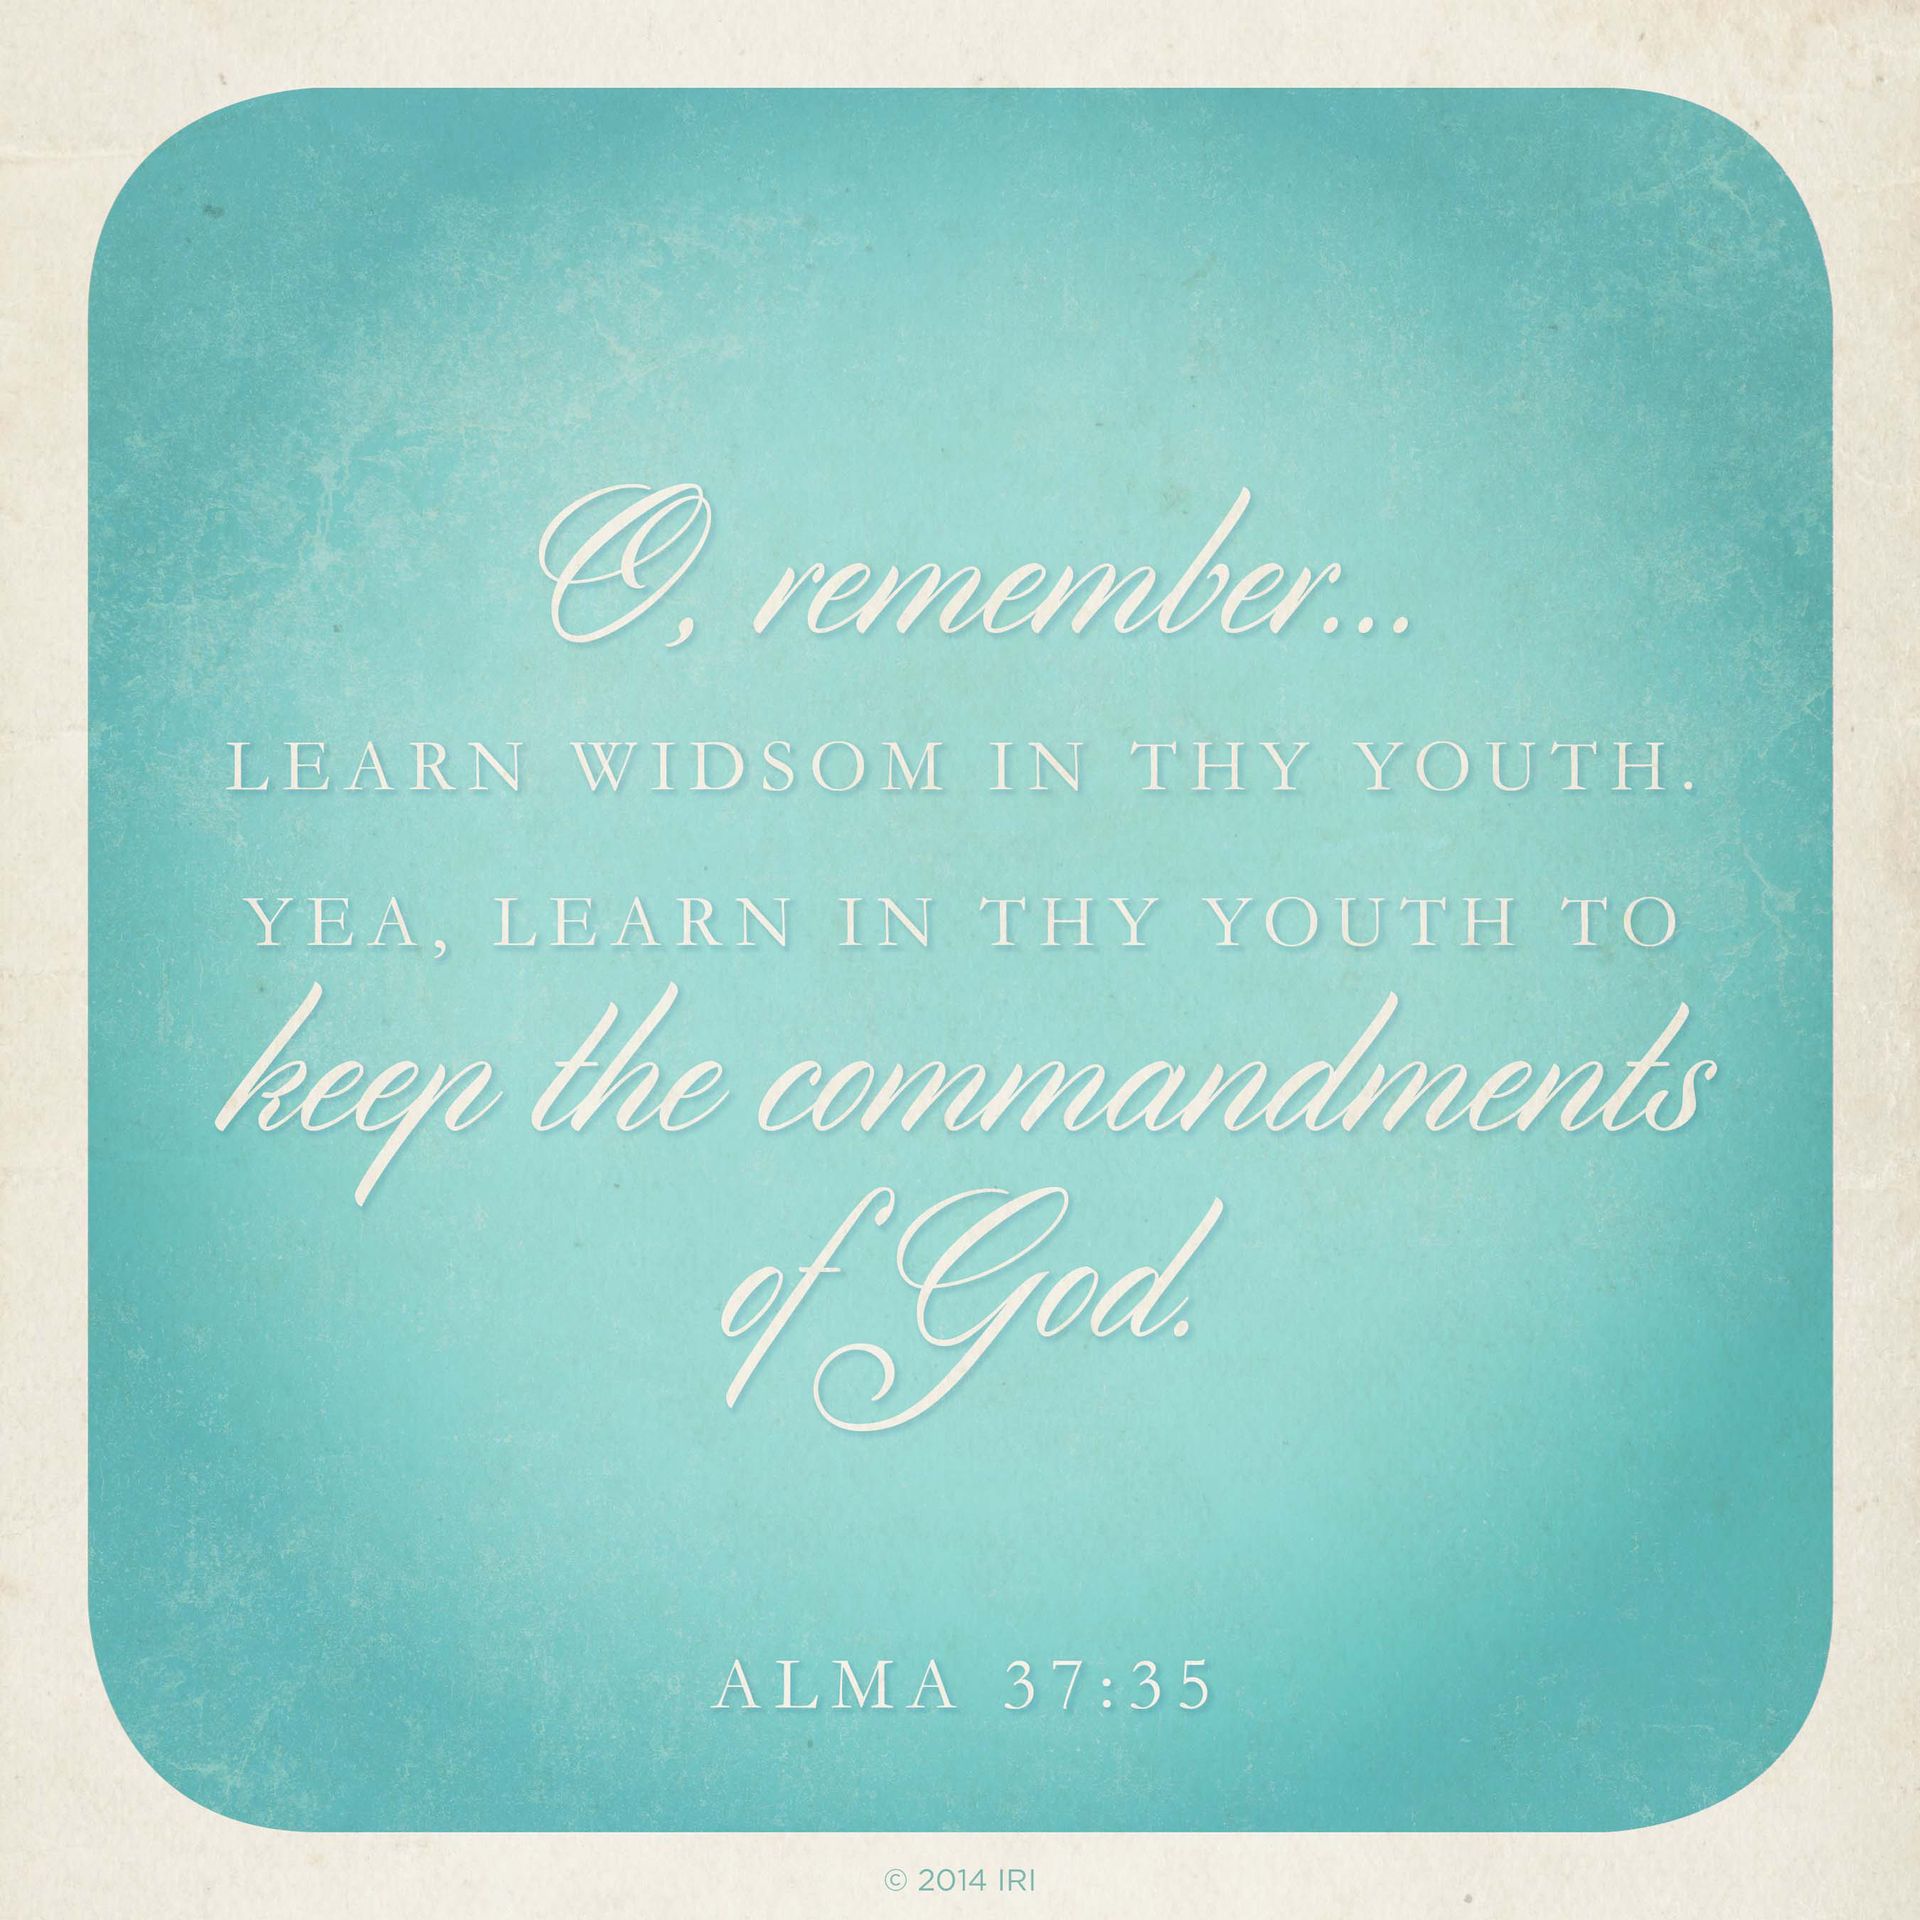 “O remember, … learn wisdom in thy youth; yea, learn in thy youth to keep the commandments of God.”—Alma 37:35